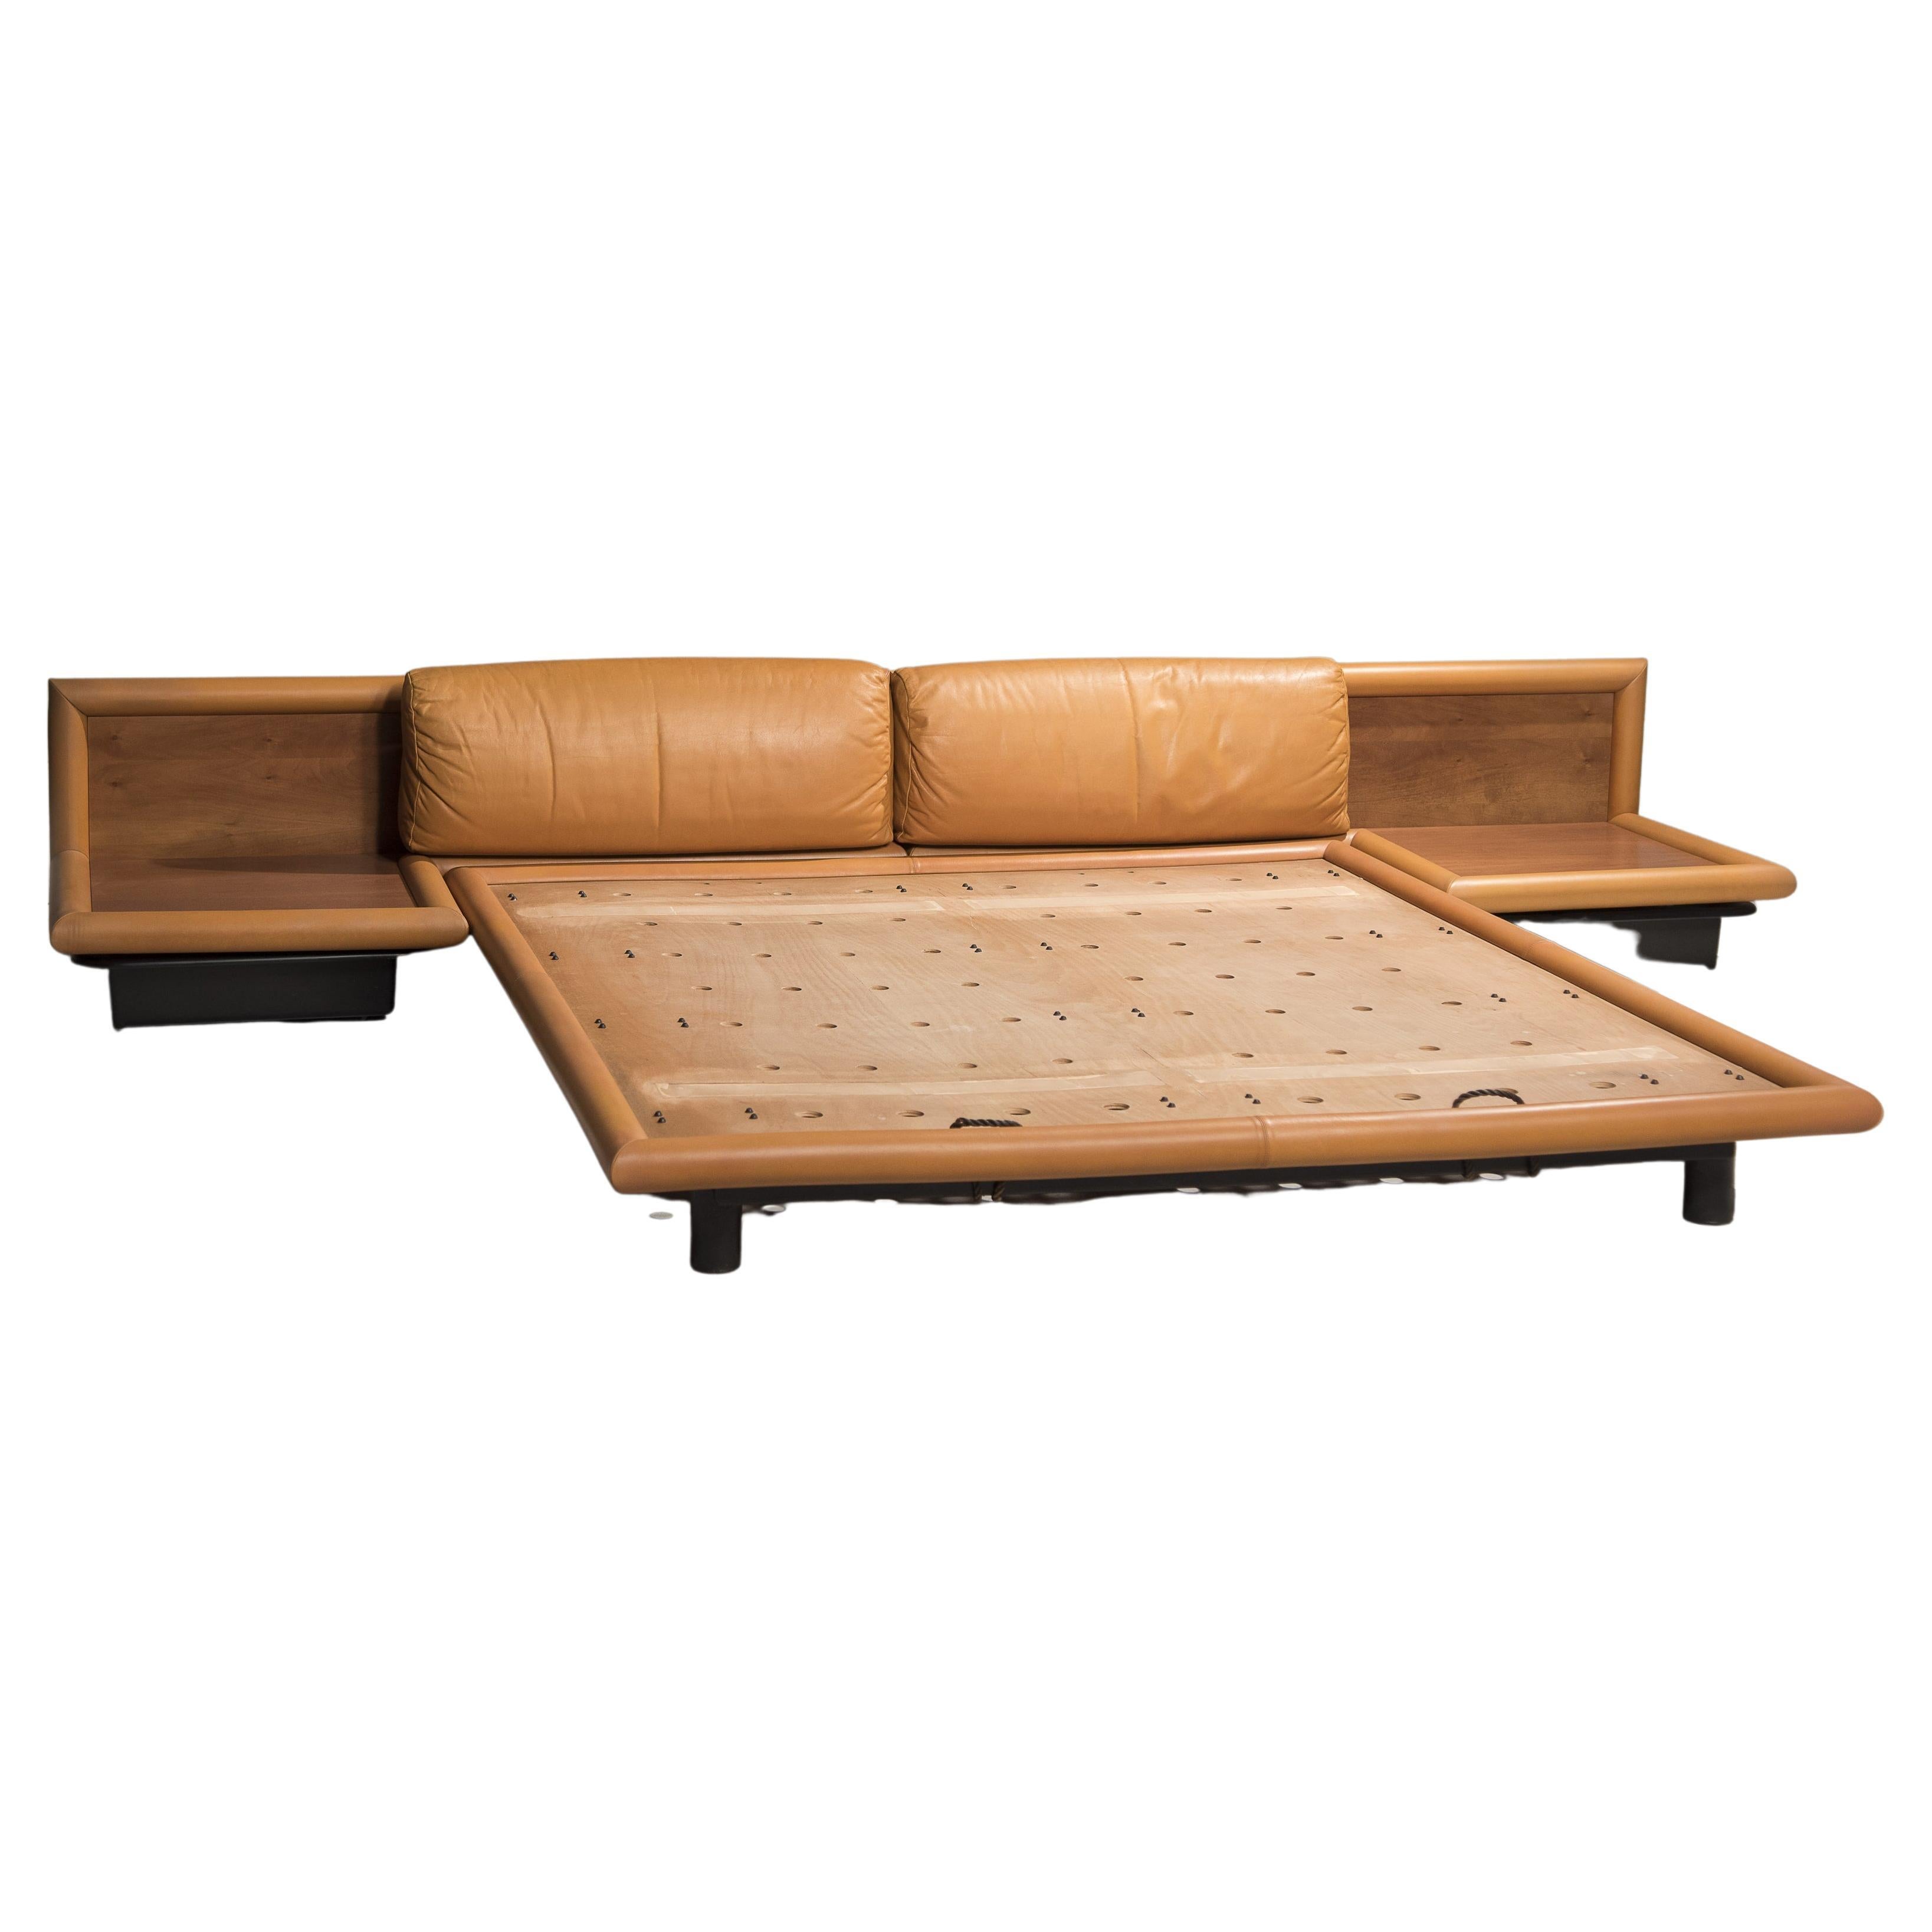 Afra  & Tobia Scarpa cognac leather bed model Morna for Molteni Italy